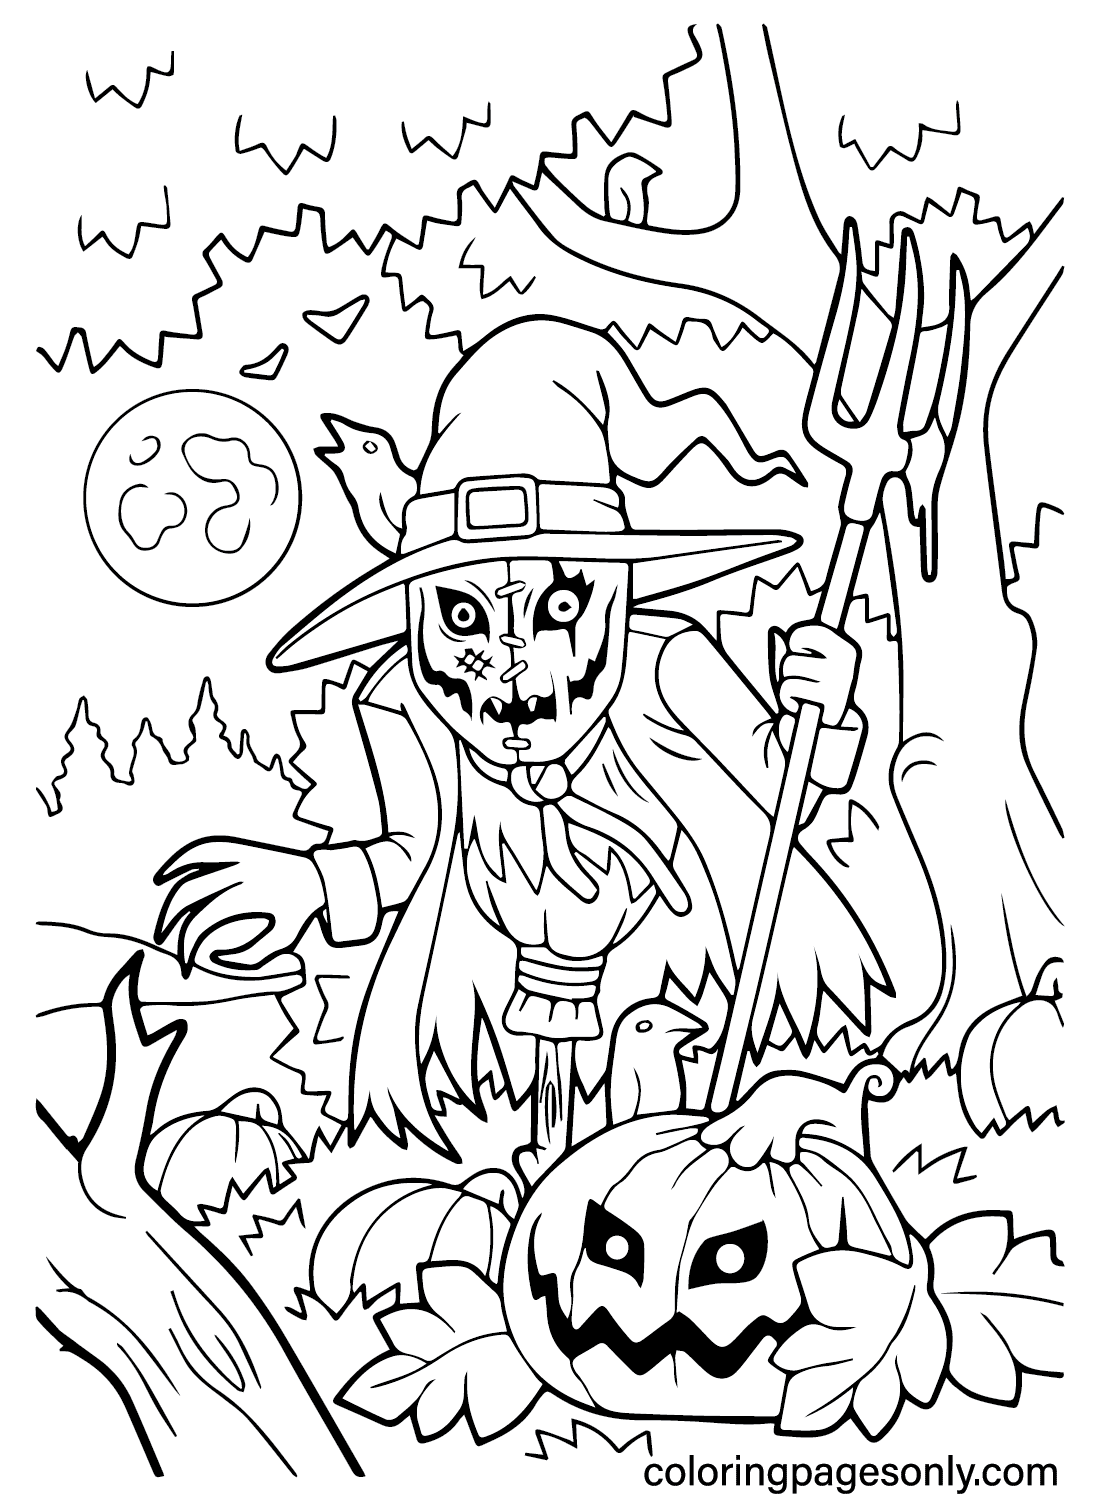 Free Scary Halloween Coloring Page